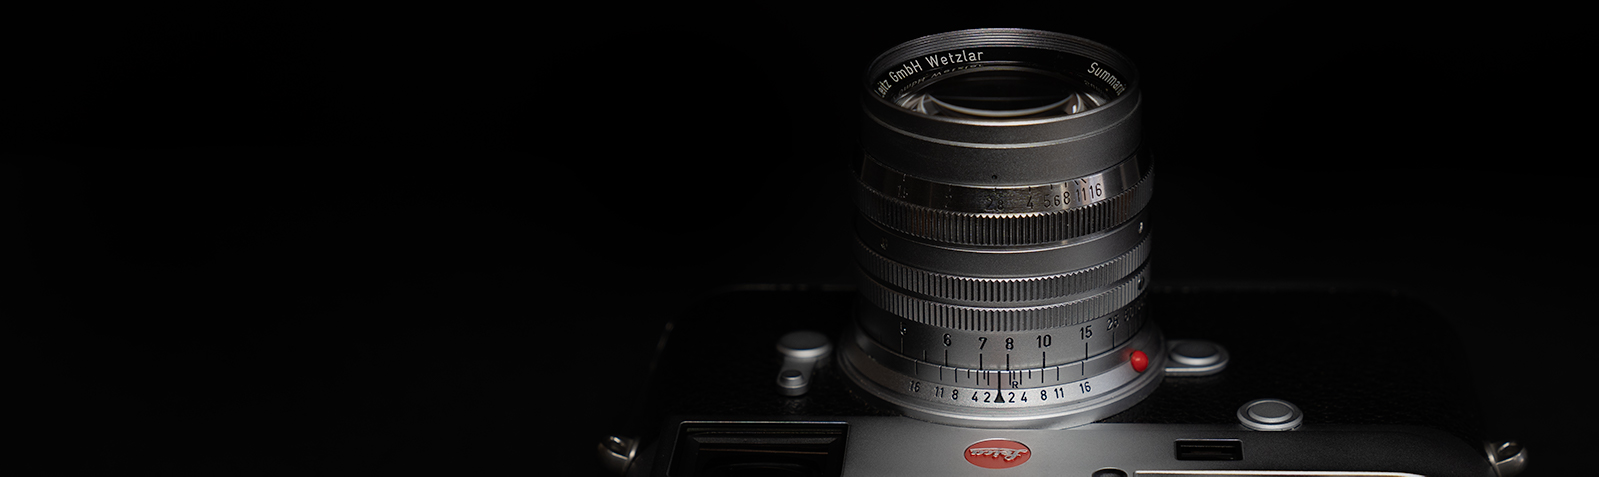 Leica Summarit 50mm f/1.5 review – Leica Lenses for Normal People